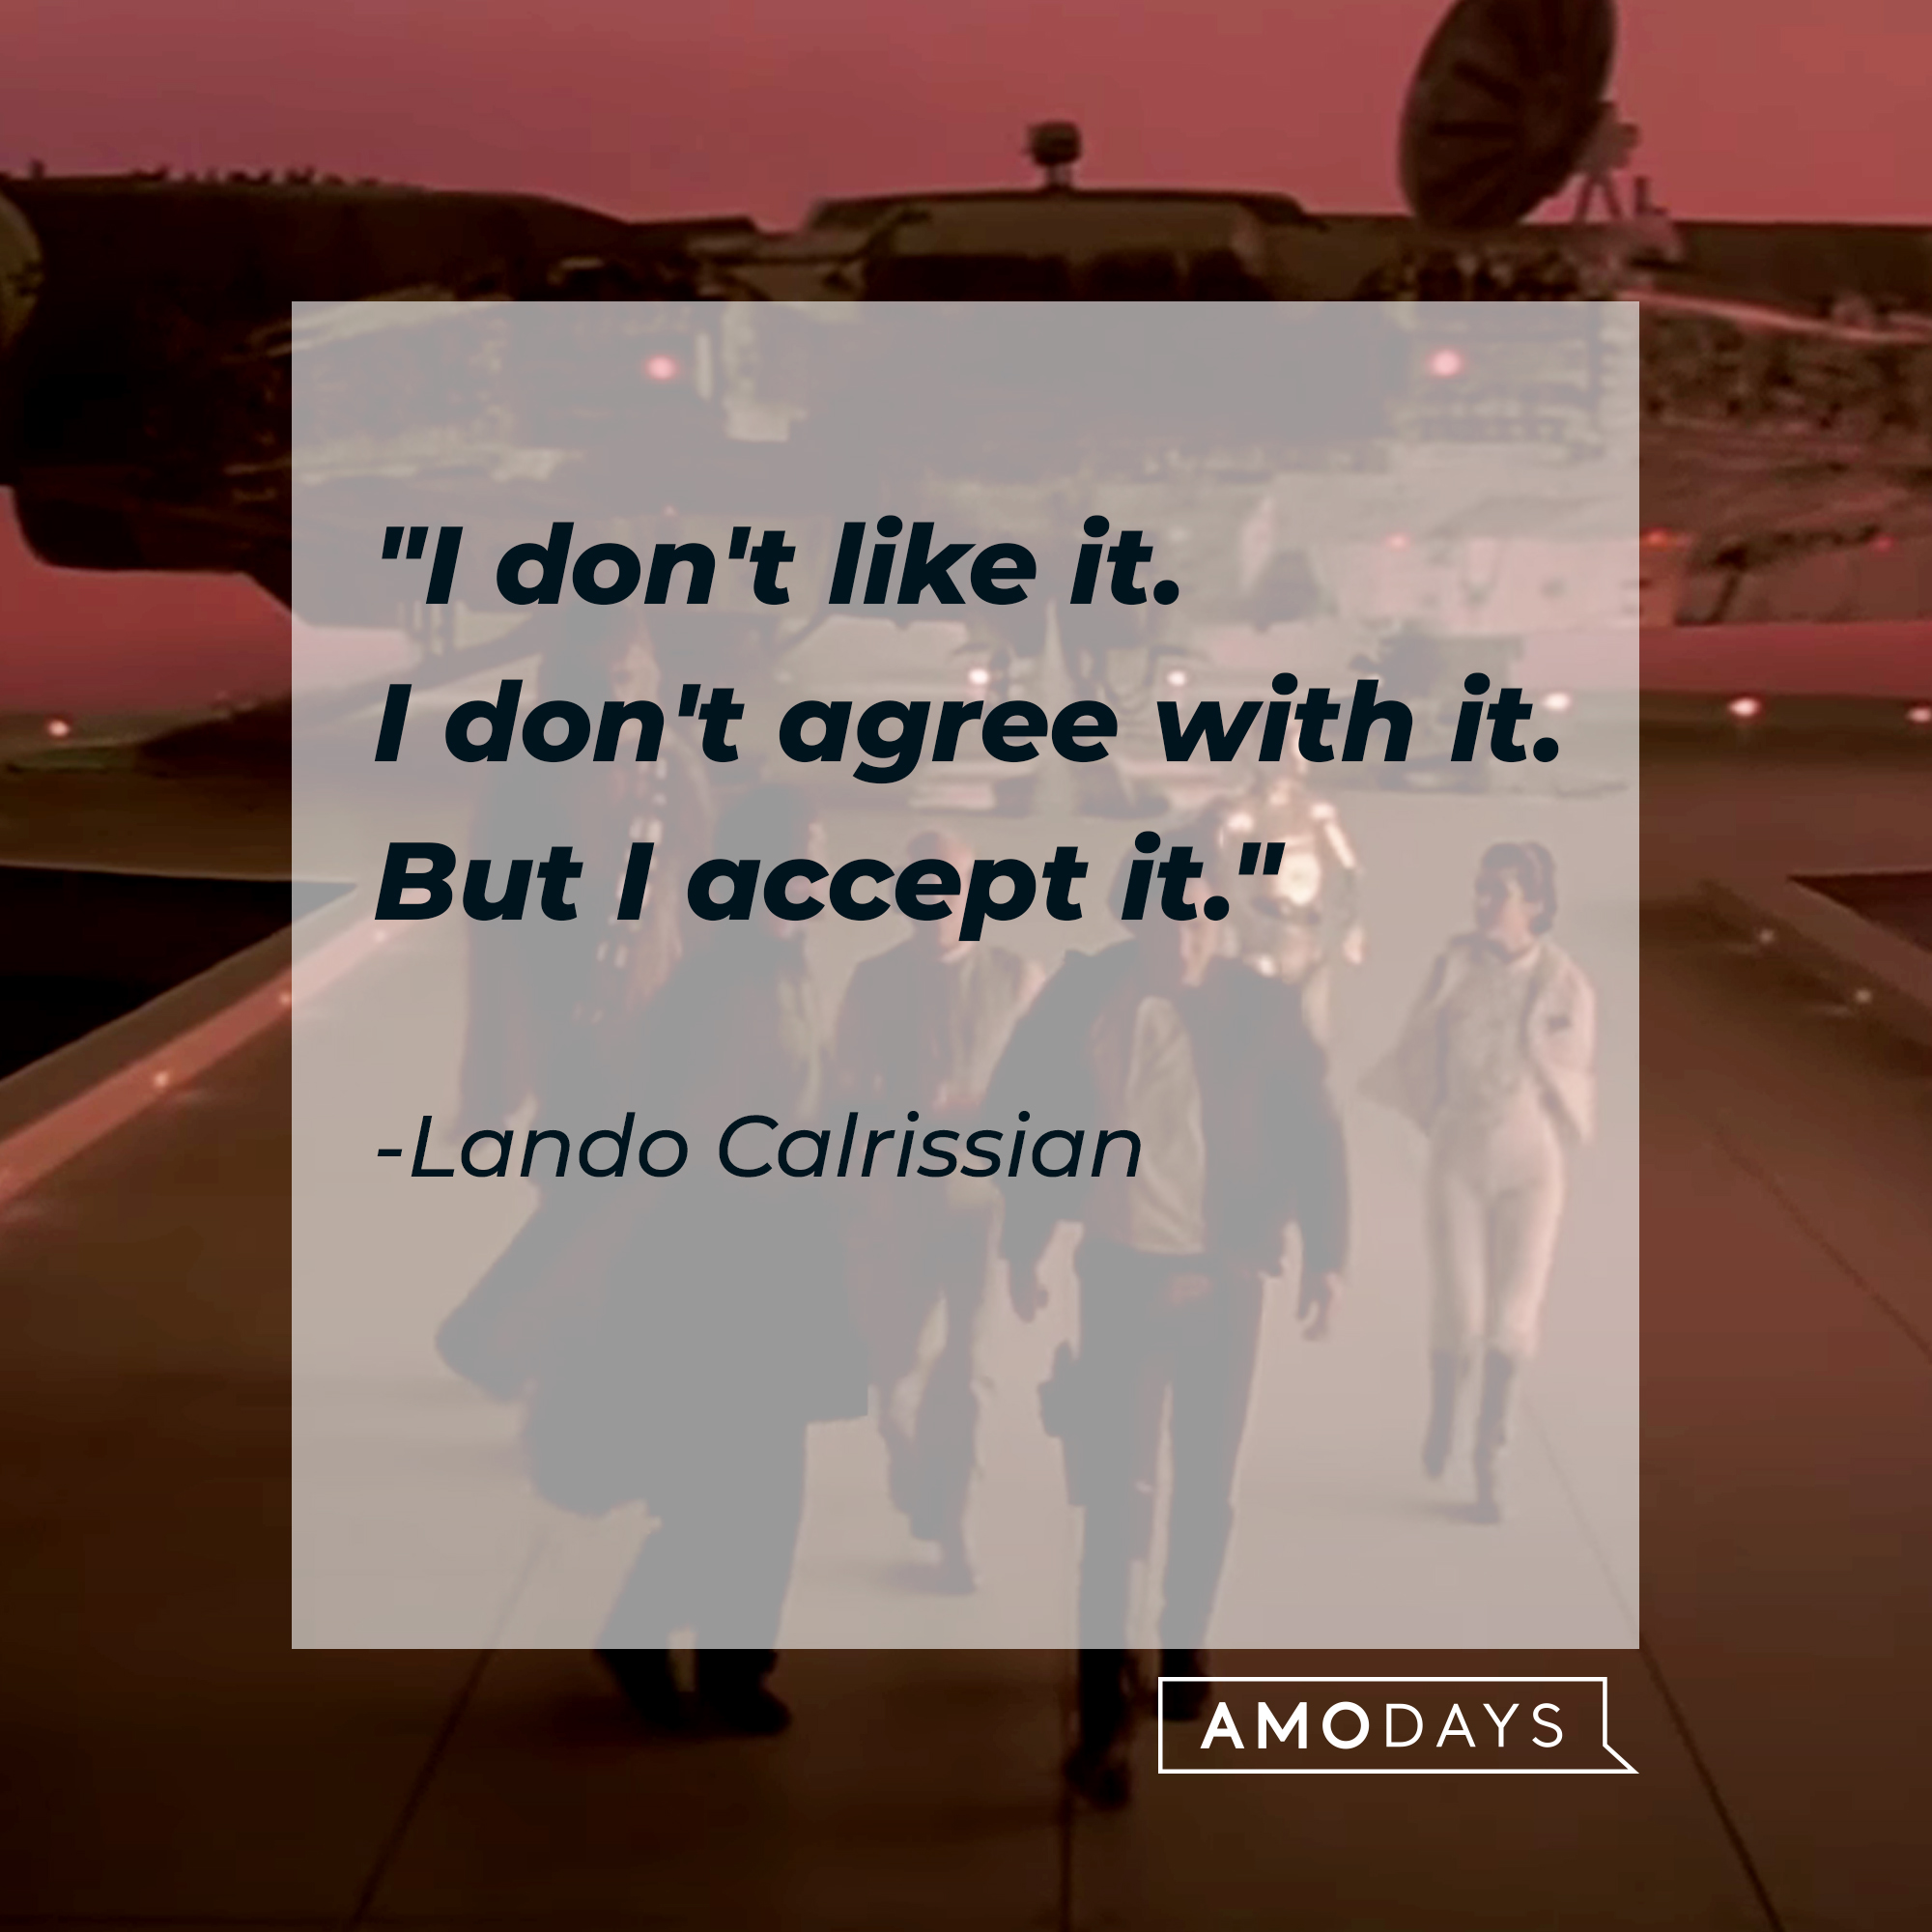 Lando Calrissian's quote, "I don't like it. I don't agree with it. But I accept it." | Source: Facebook/StarWars